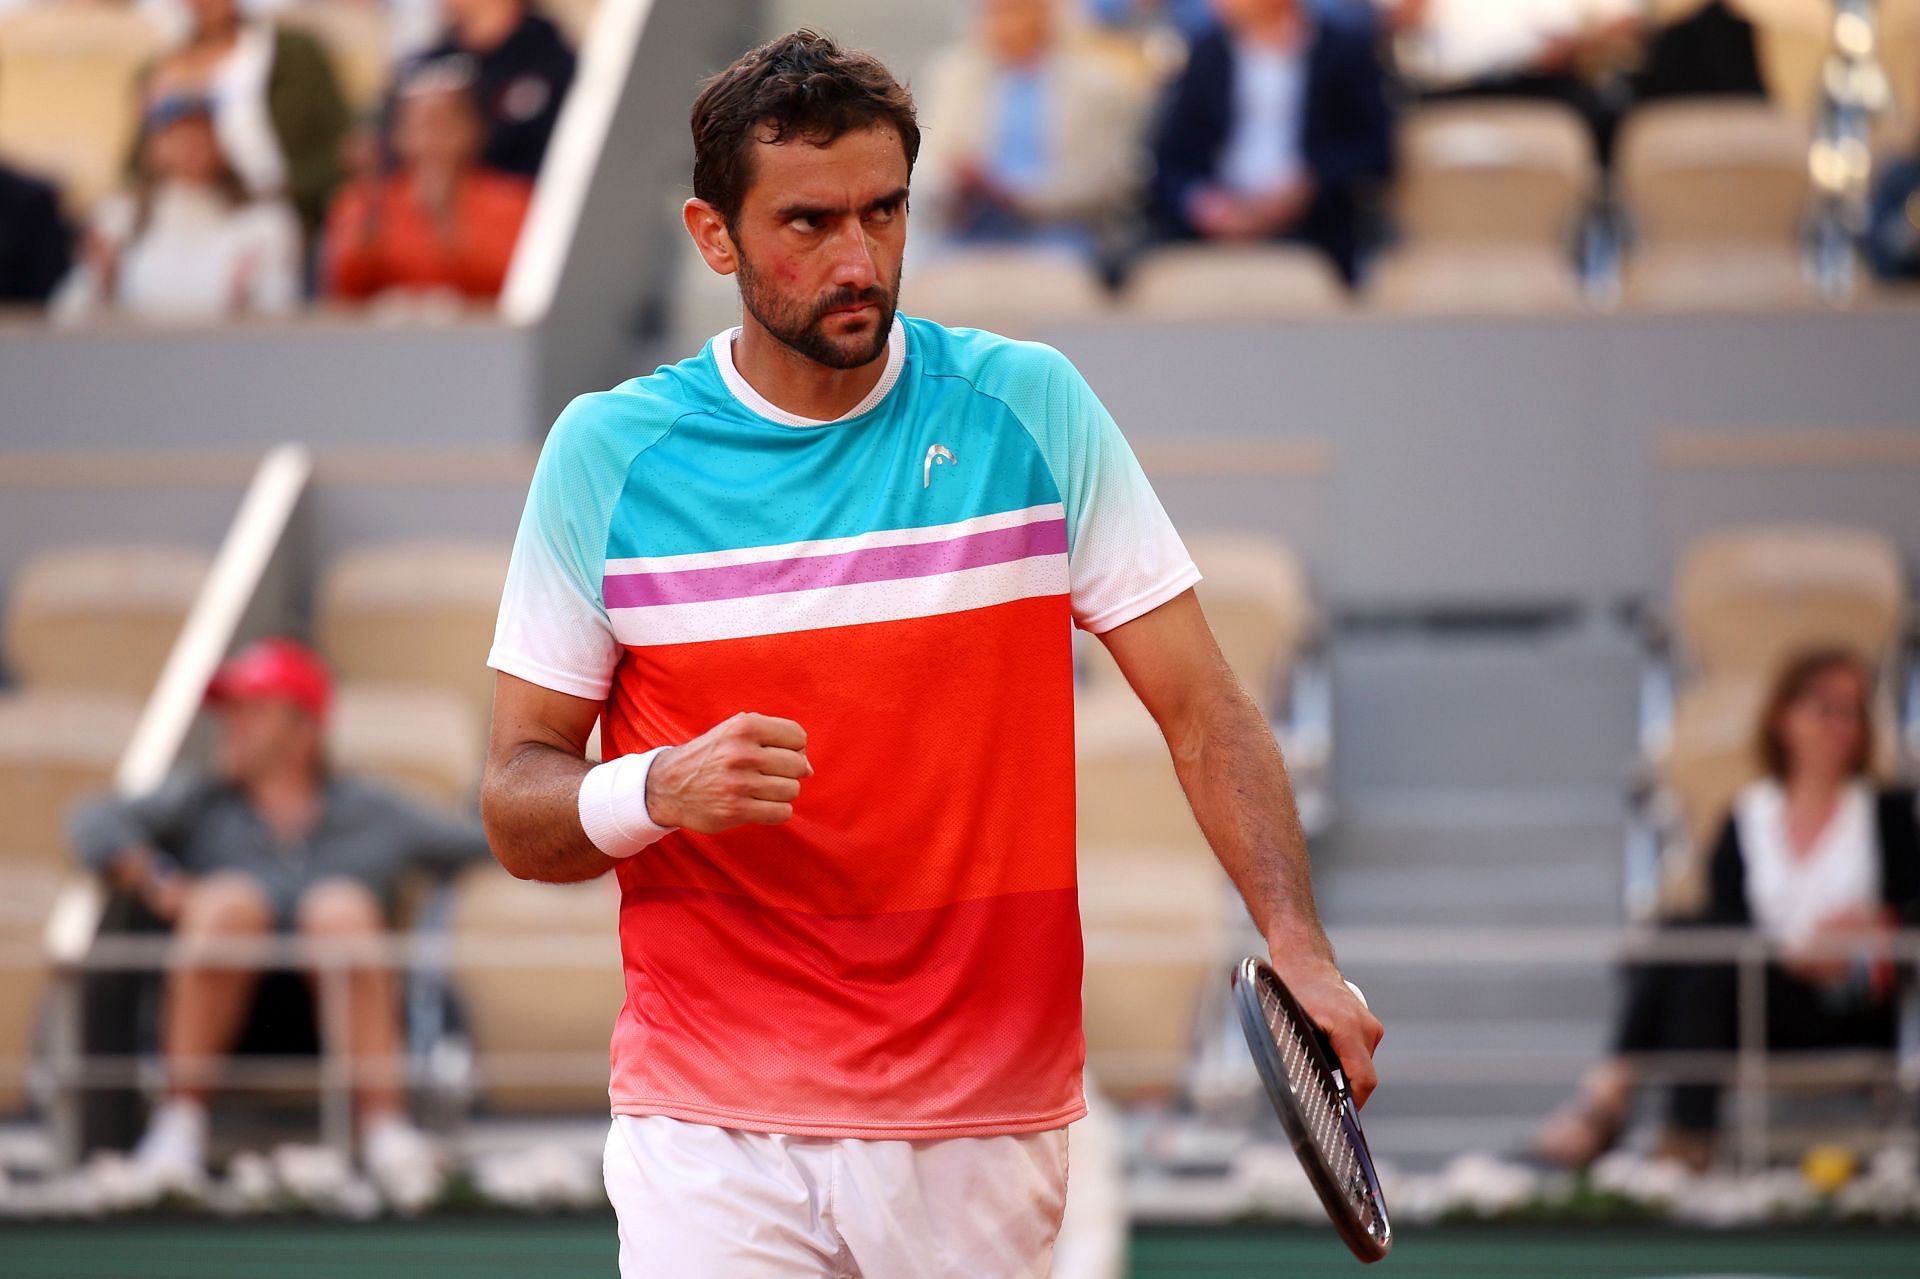 Marin Cilic will take on either Holger Rune or Casper Ruud in the semifinals of the French Open